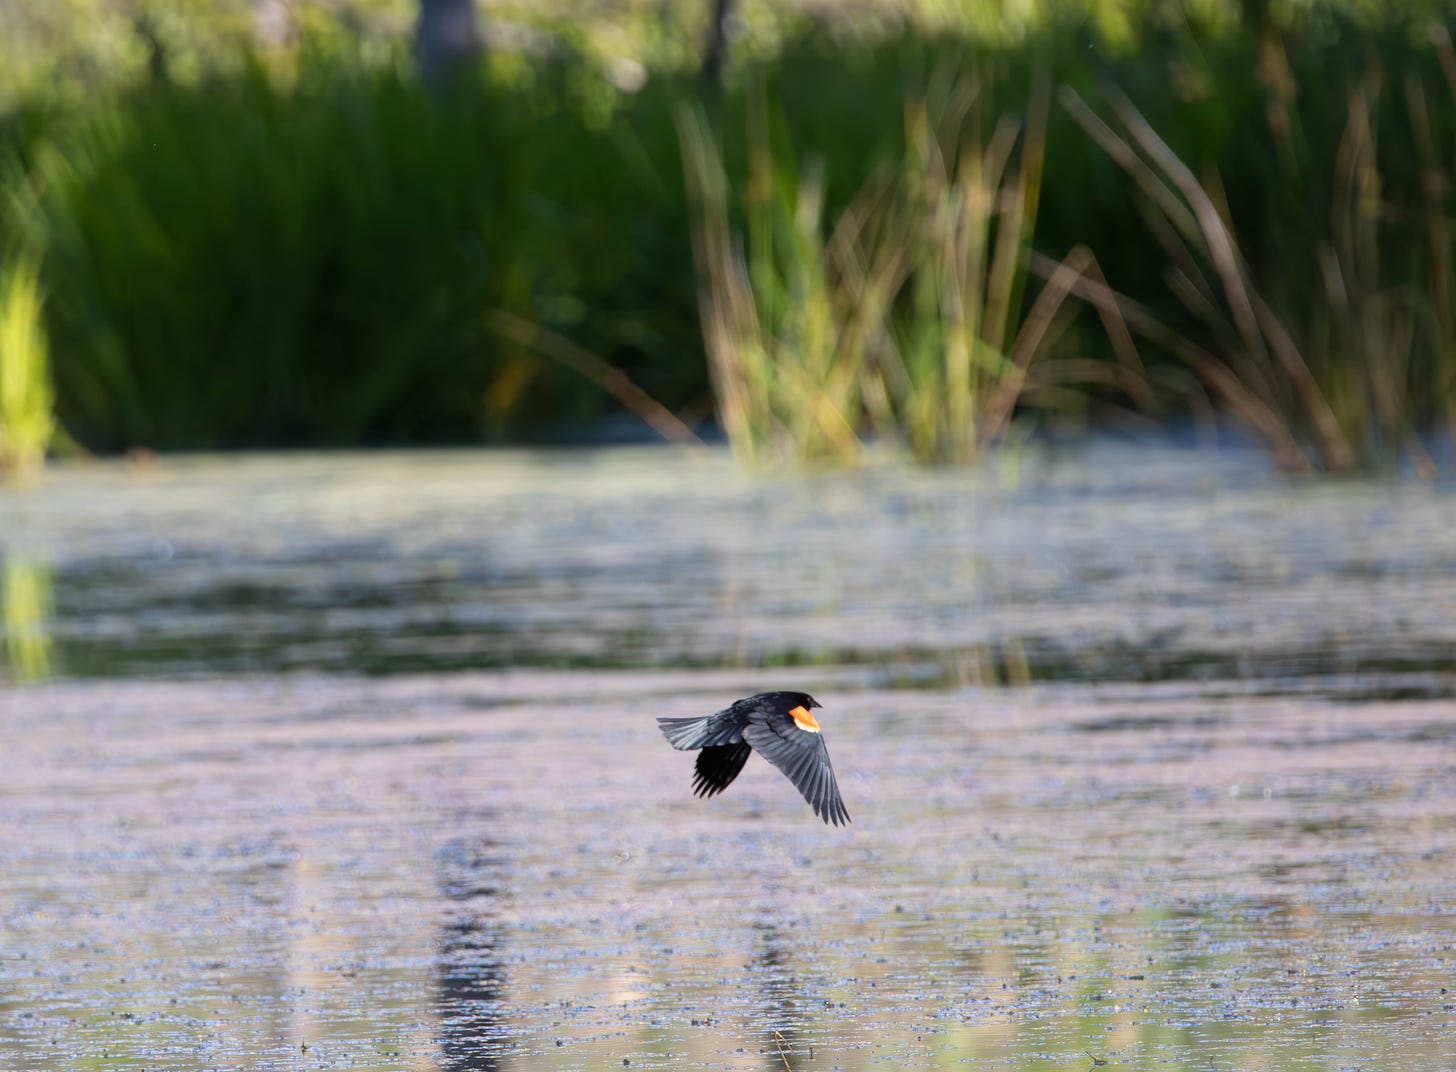 A male, redwing blackbird flies low over a swampy wetland with green plants in the background